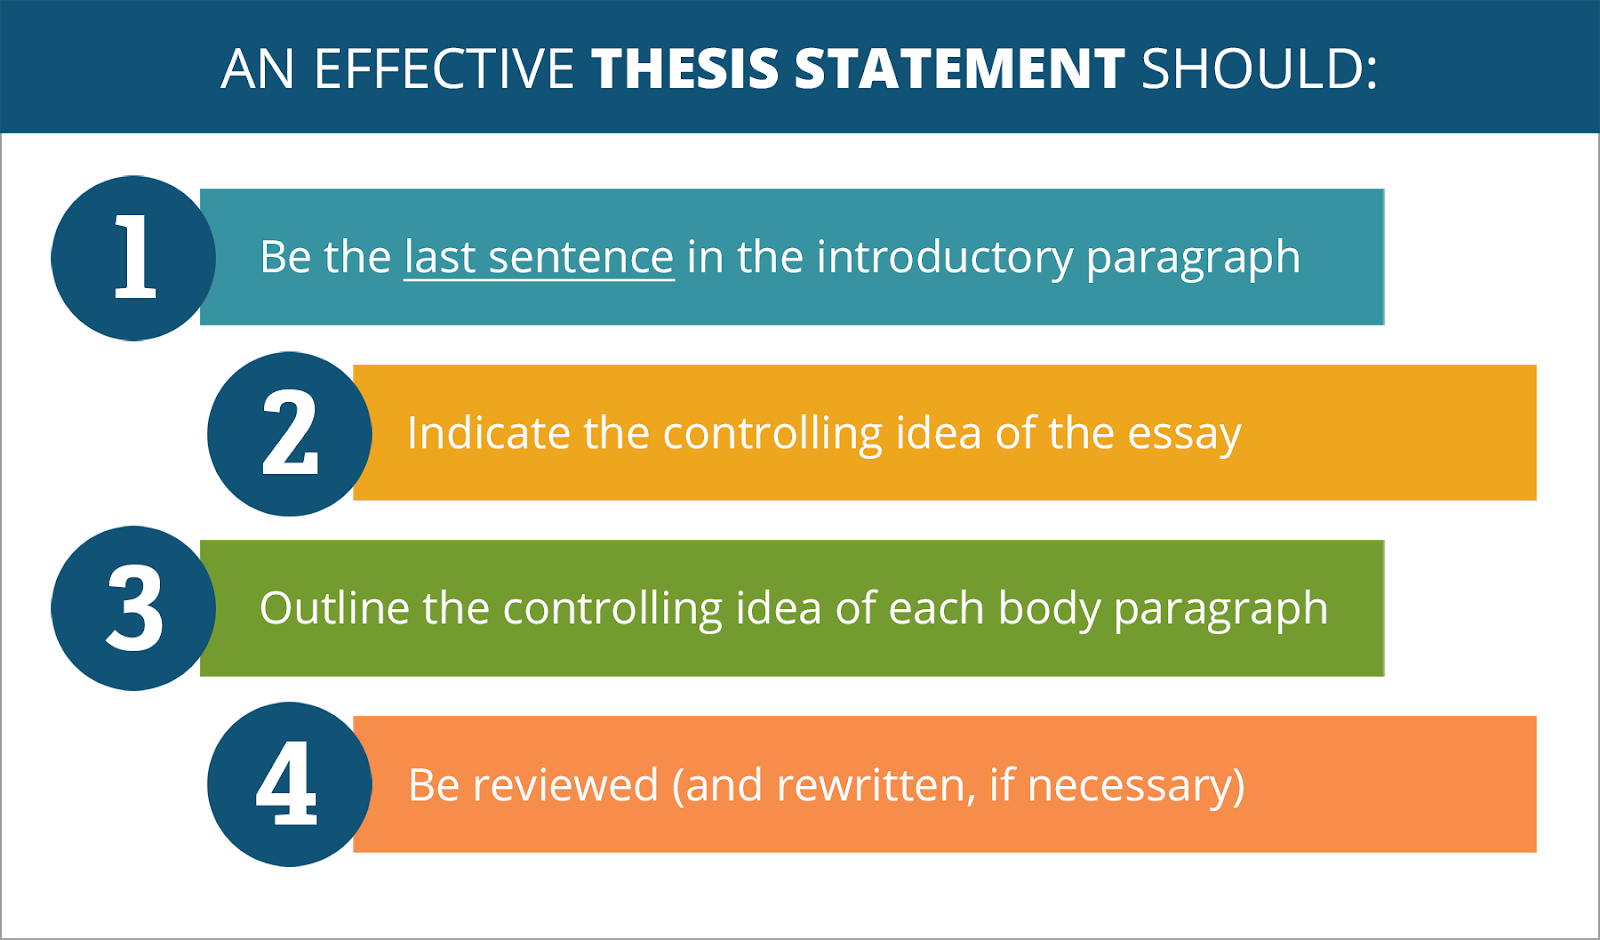 Components of an Effective Thesis Statement